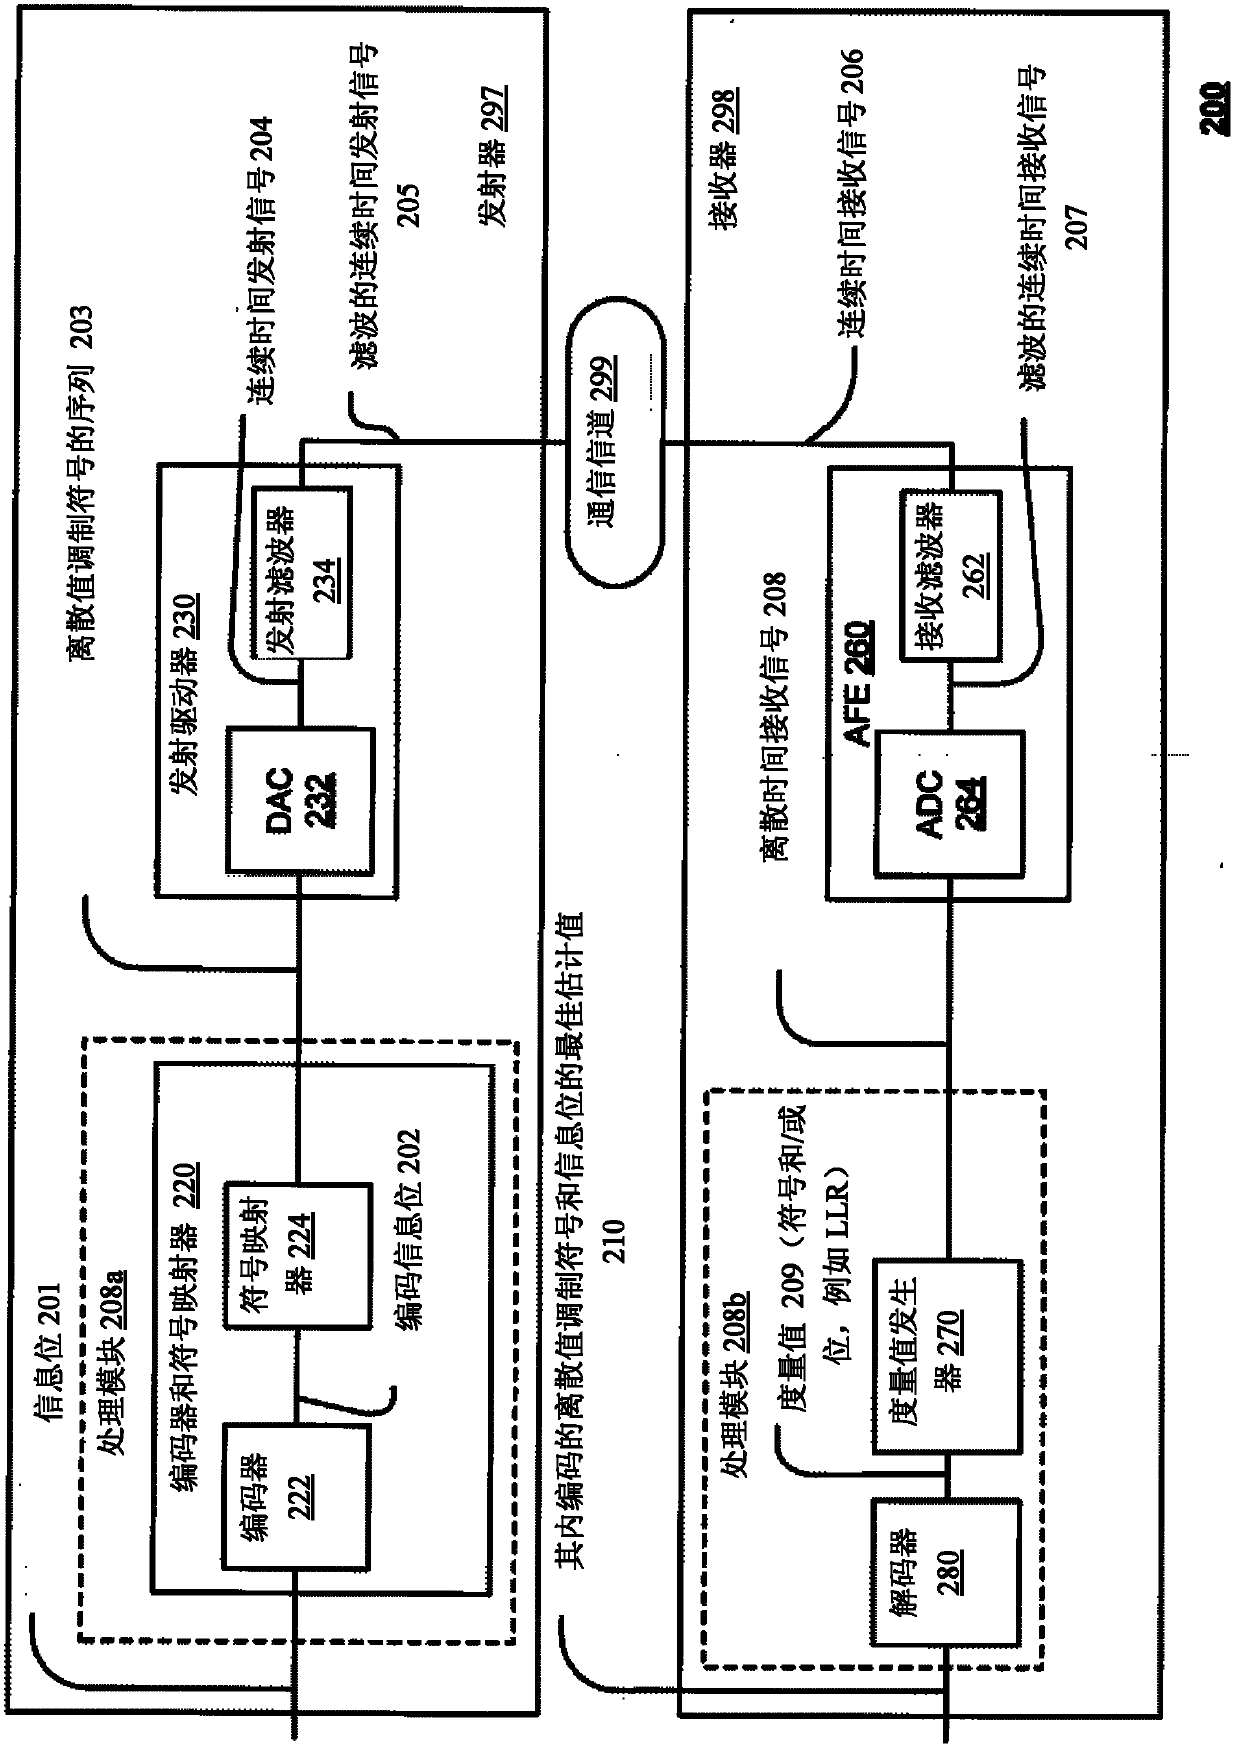 Convergent network topology discovery and mapping